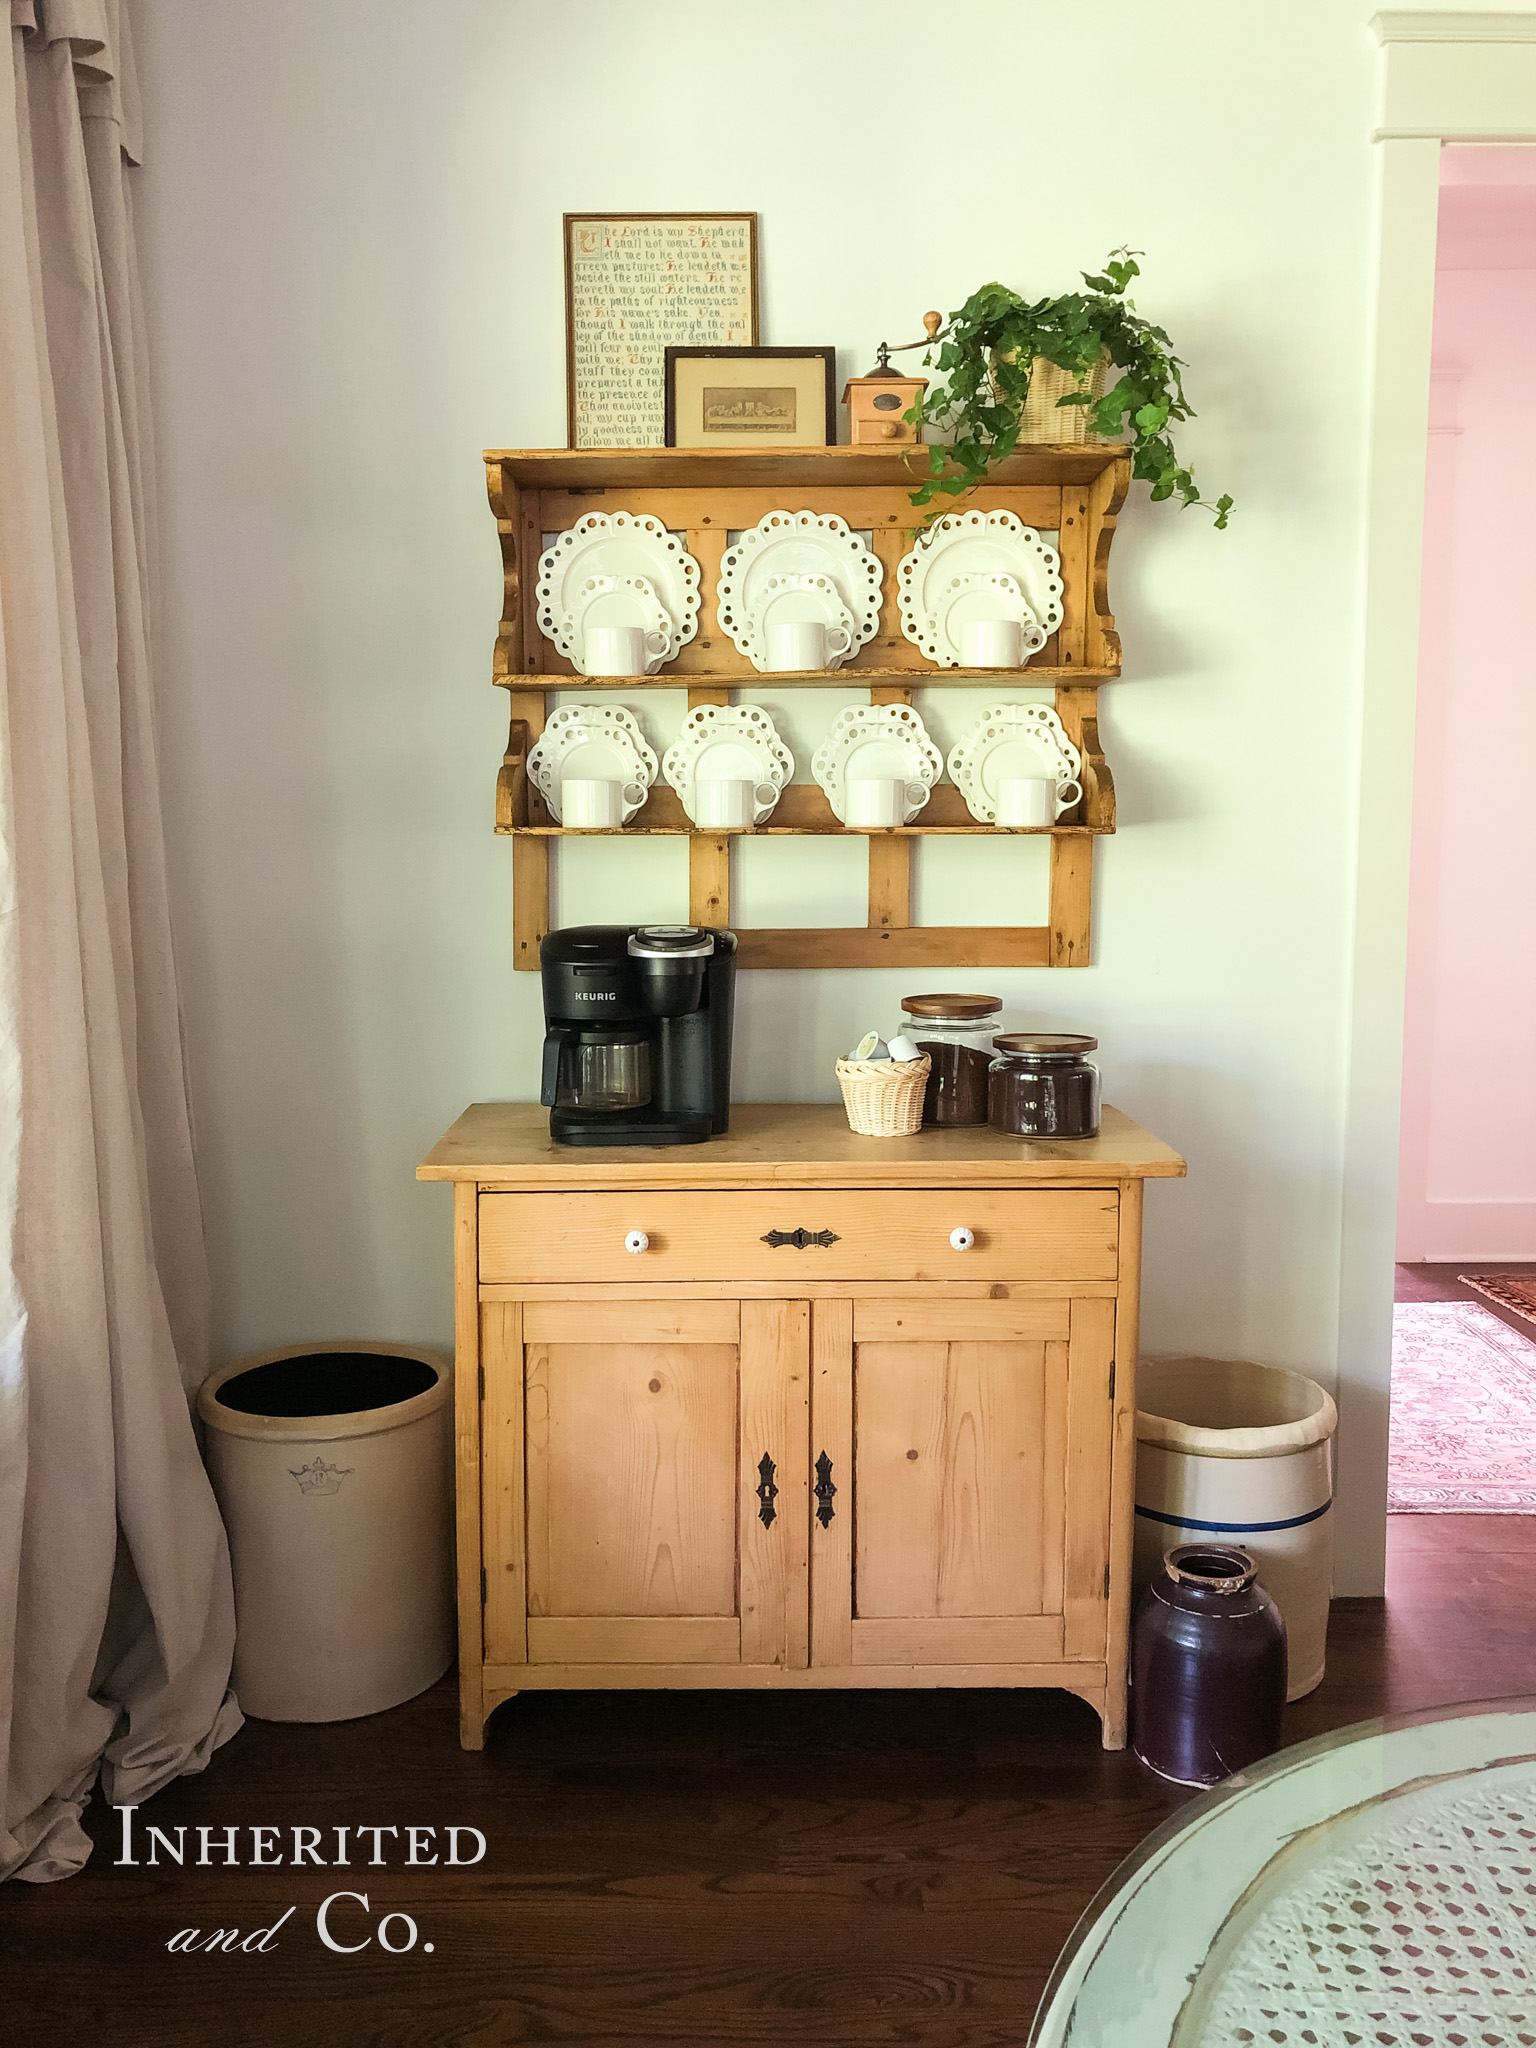 Antique English pine cabinet and plate rack turned into a home coffee bar